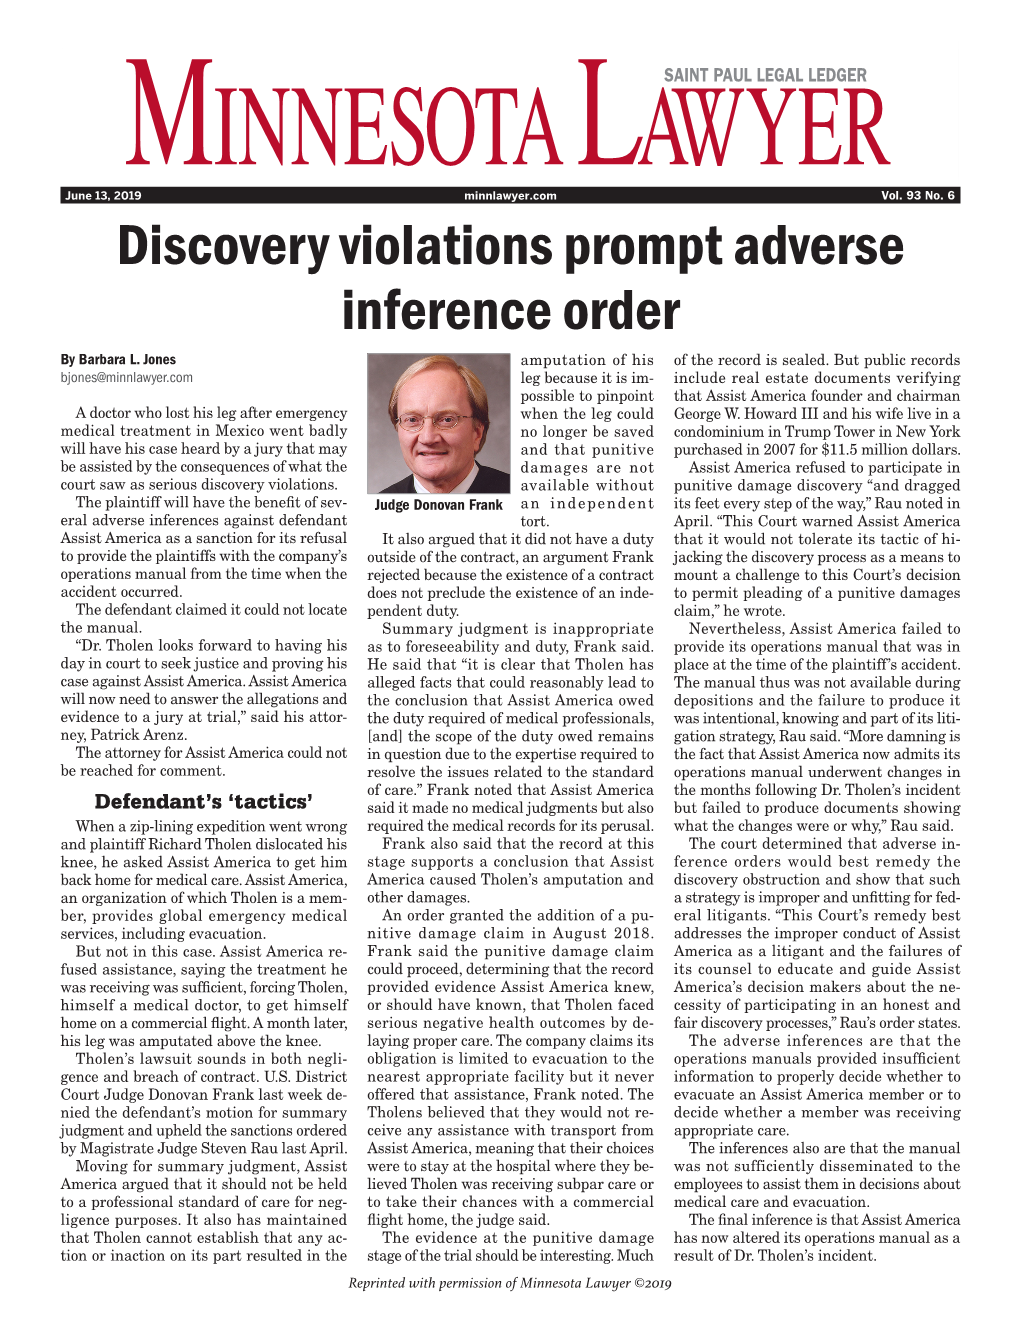 Discovery Violations Prompt Adverse Inference Order by Barbara L